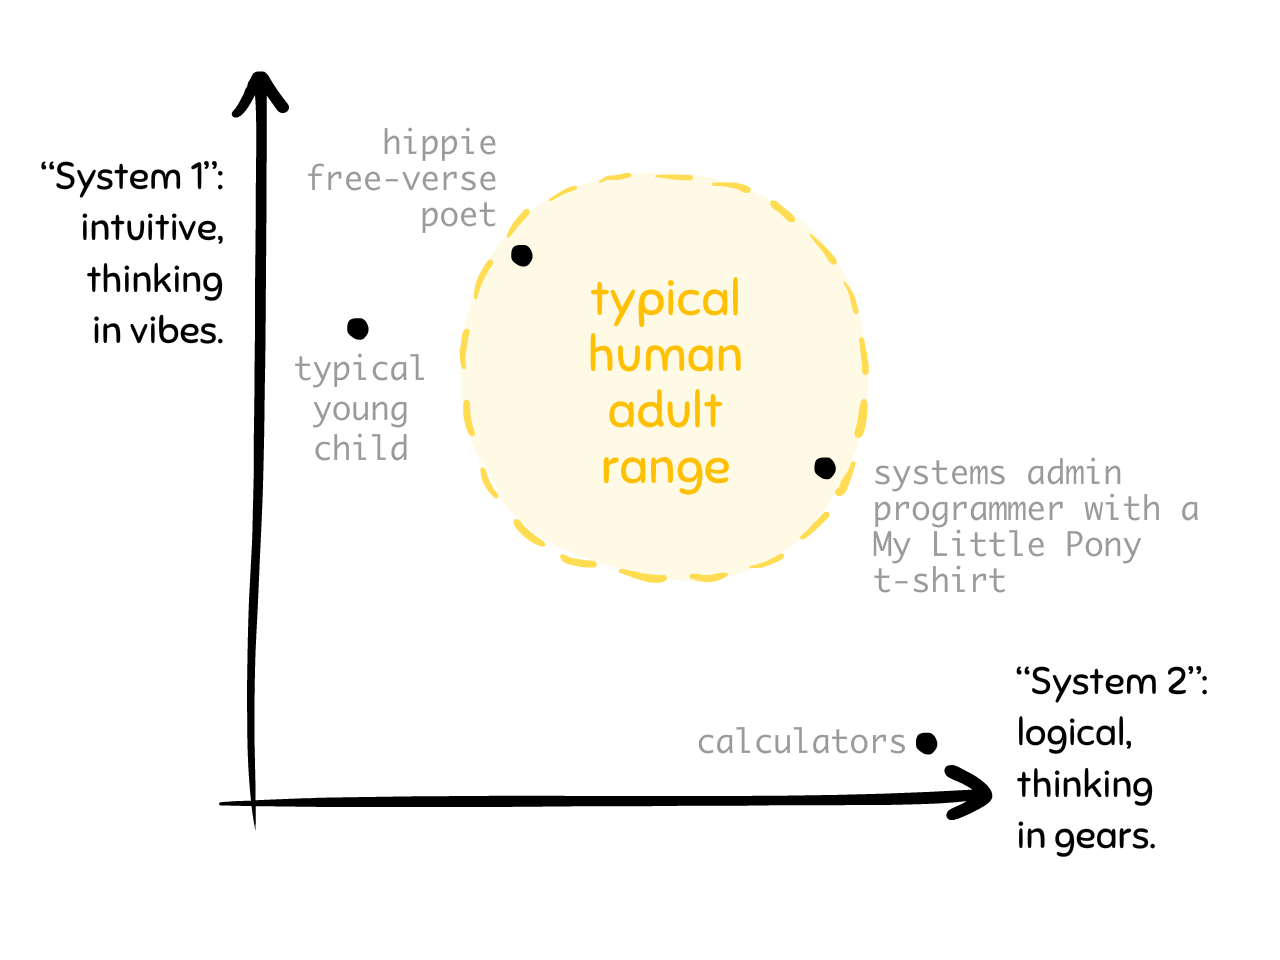 Two-axis graph of System 1 ("intuitive") vs System 2 (logical) thinking. A calculator is high System 2, low System 1. Young children are high System 1, low System 2. The typical human adult range is a high value of both.